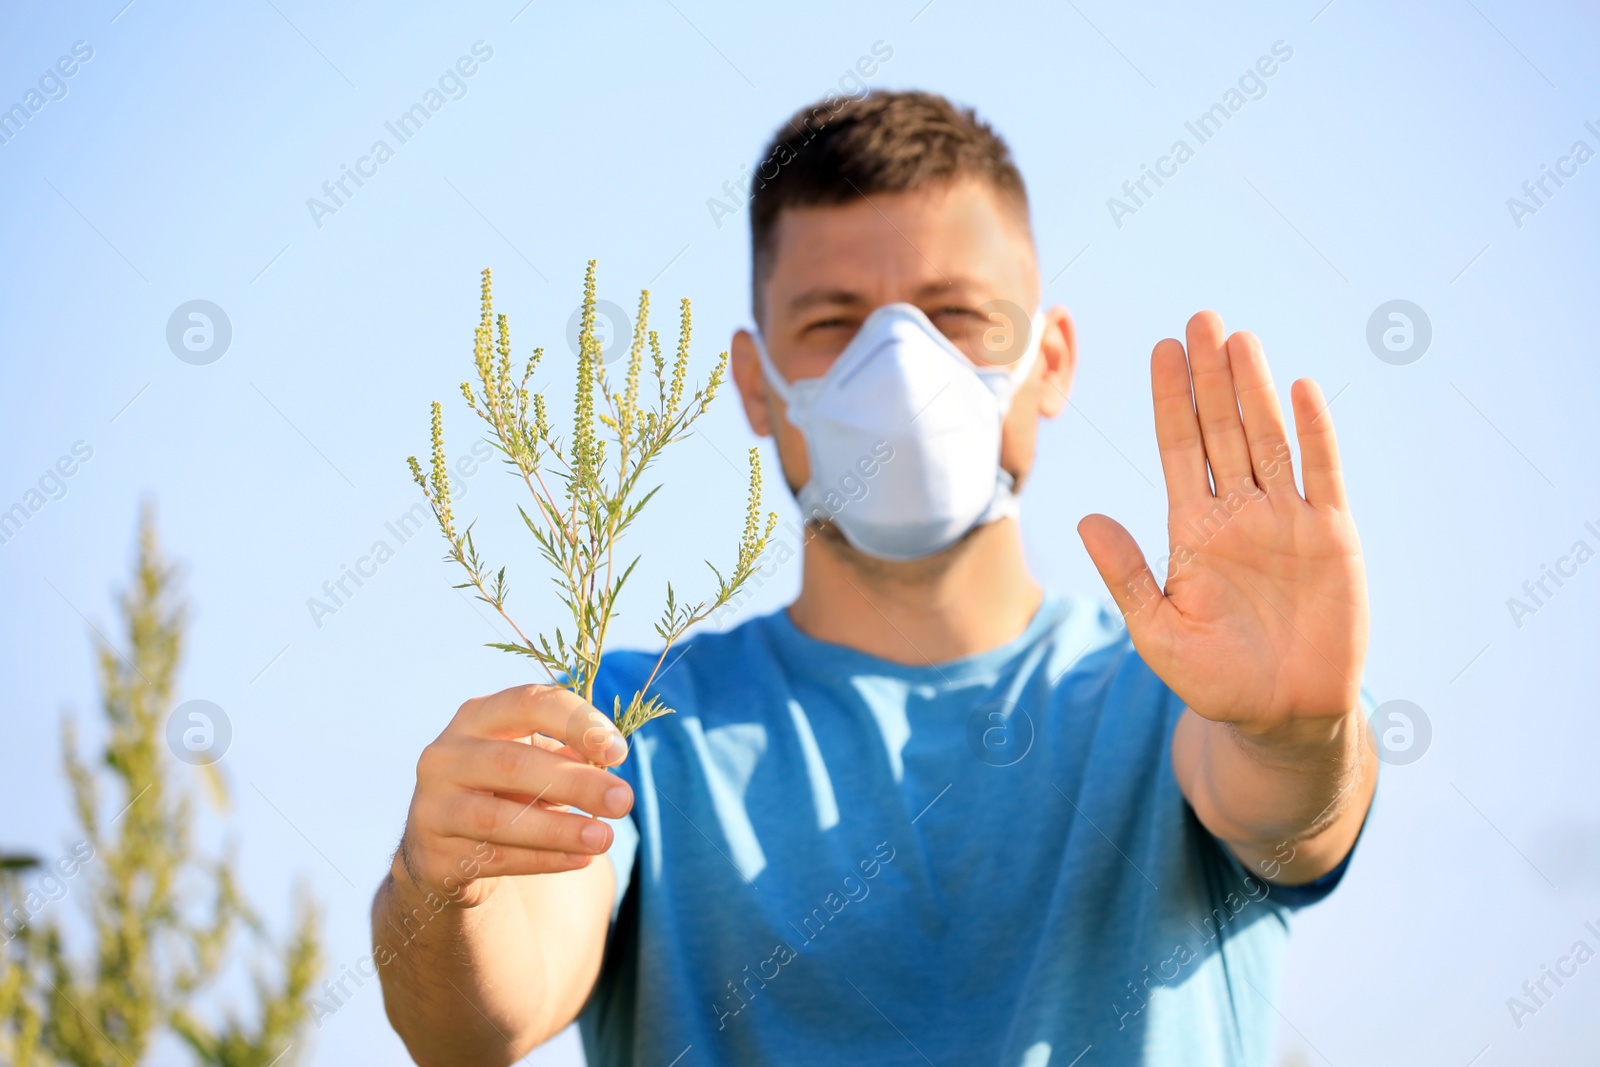 Photo of Man with ragweed branch suffering from allergy outdoors, focus on hands